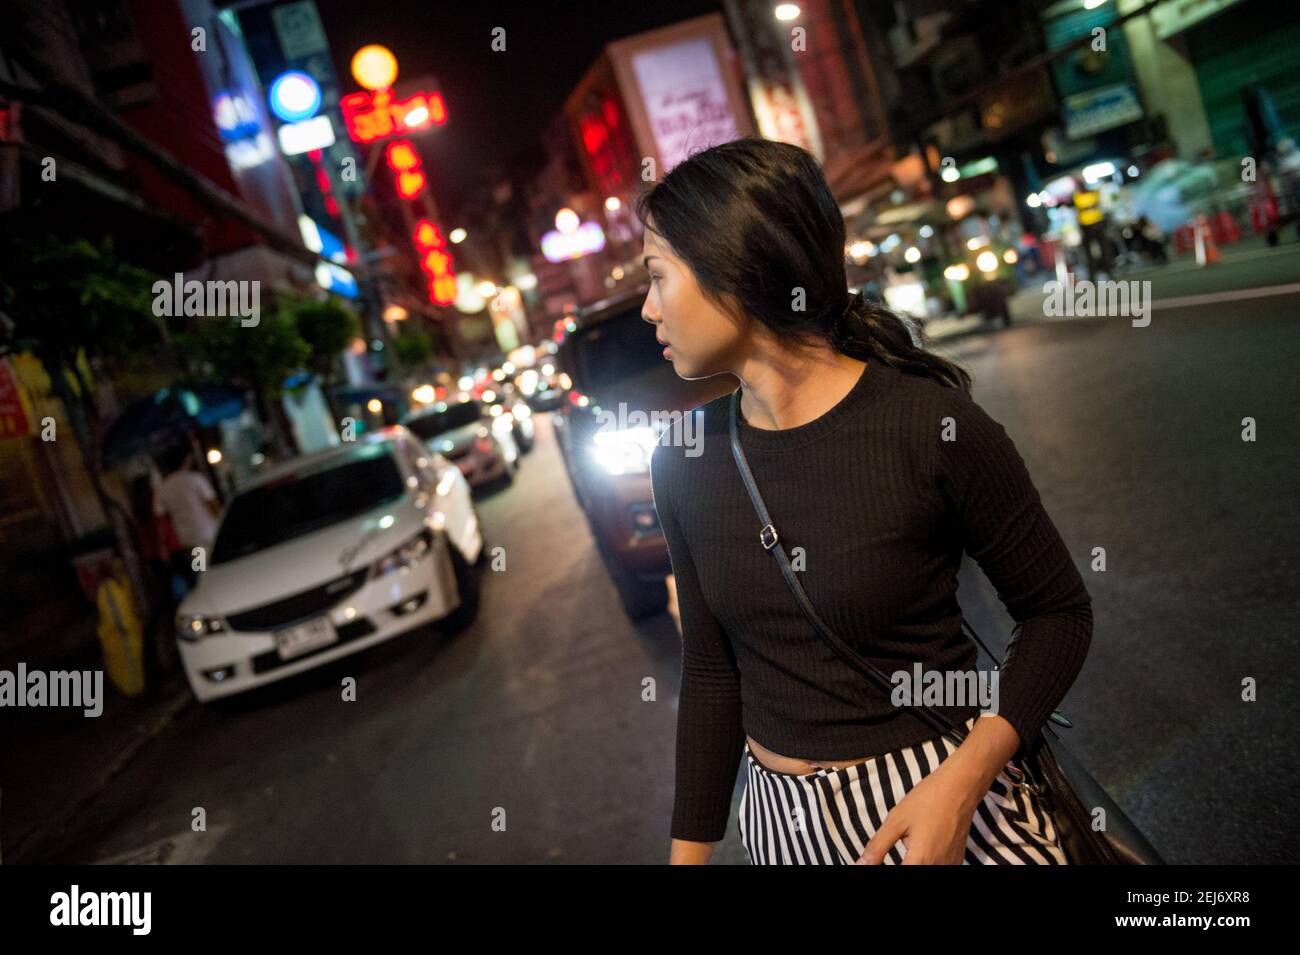 Young beautiful Asia girl in a busy street at night, walking while looking back over her shoulder. City lights and traffic in the background. Stock Photo